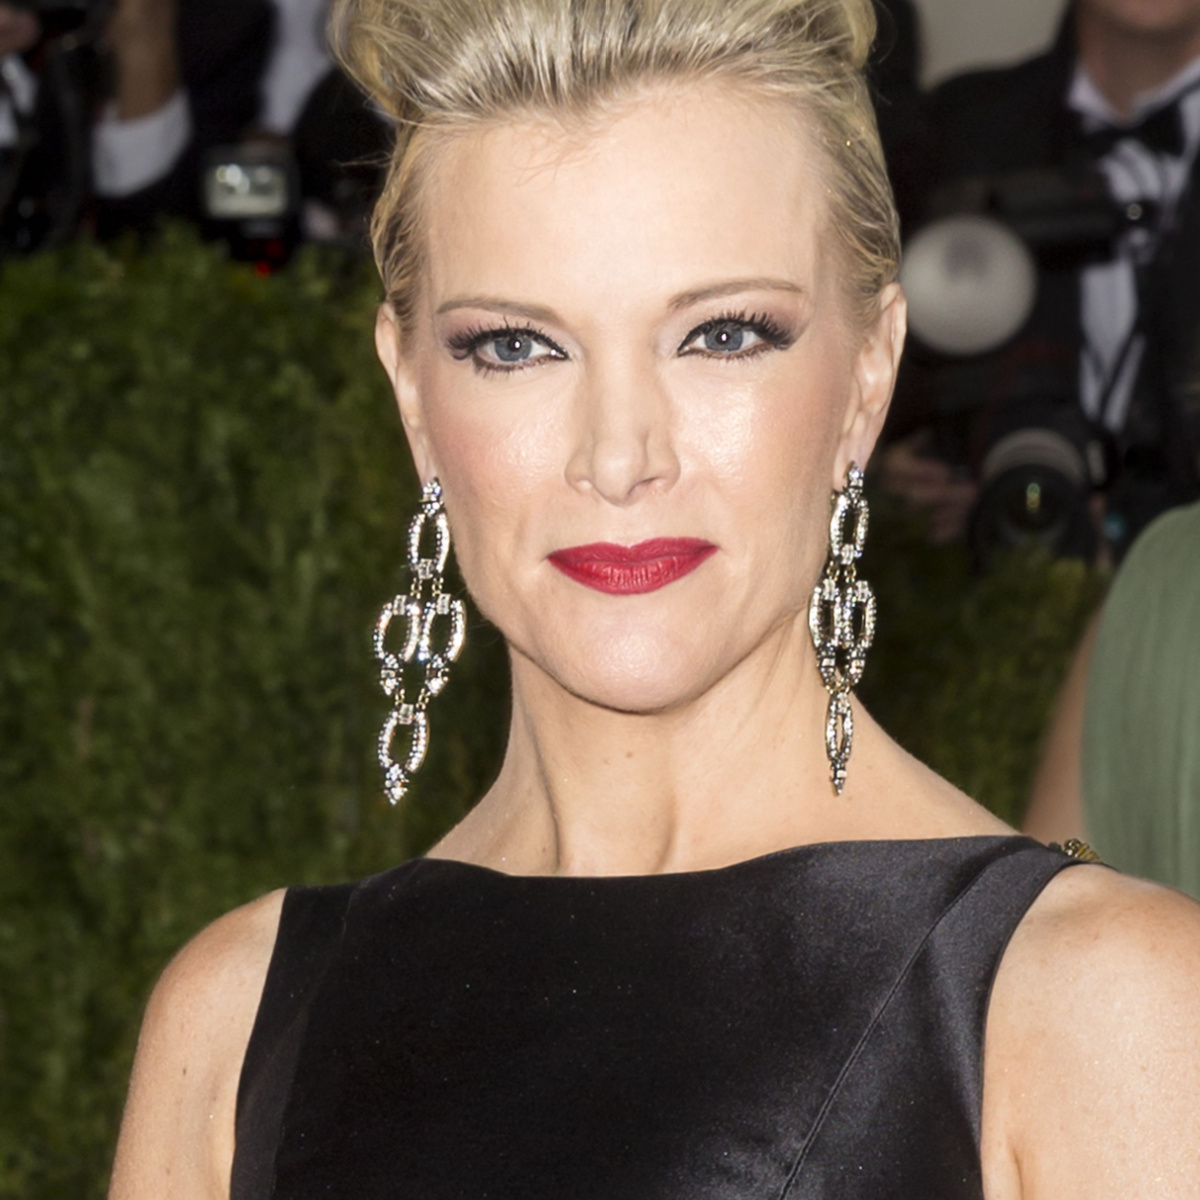 Celebrity Megyn Kelly Challenges Celebrity Charlize Theron Over Drag Queens and Drag Shows, Web Fans Express Mixed Reactions